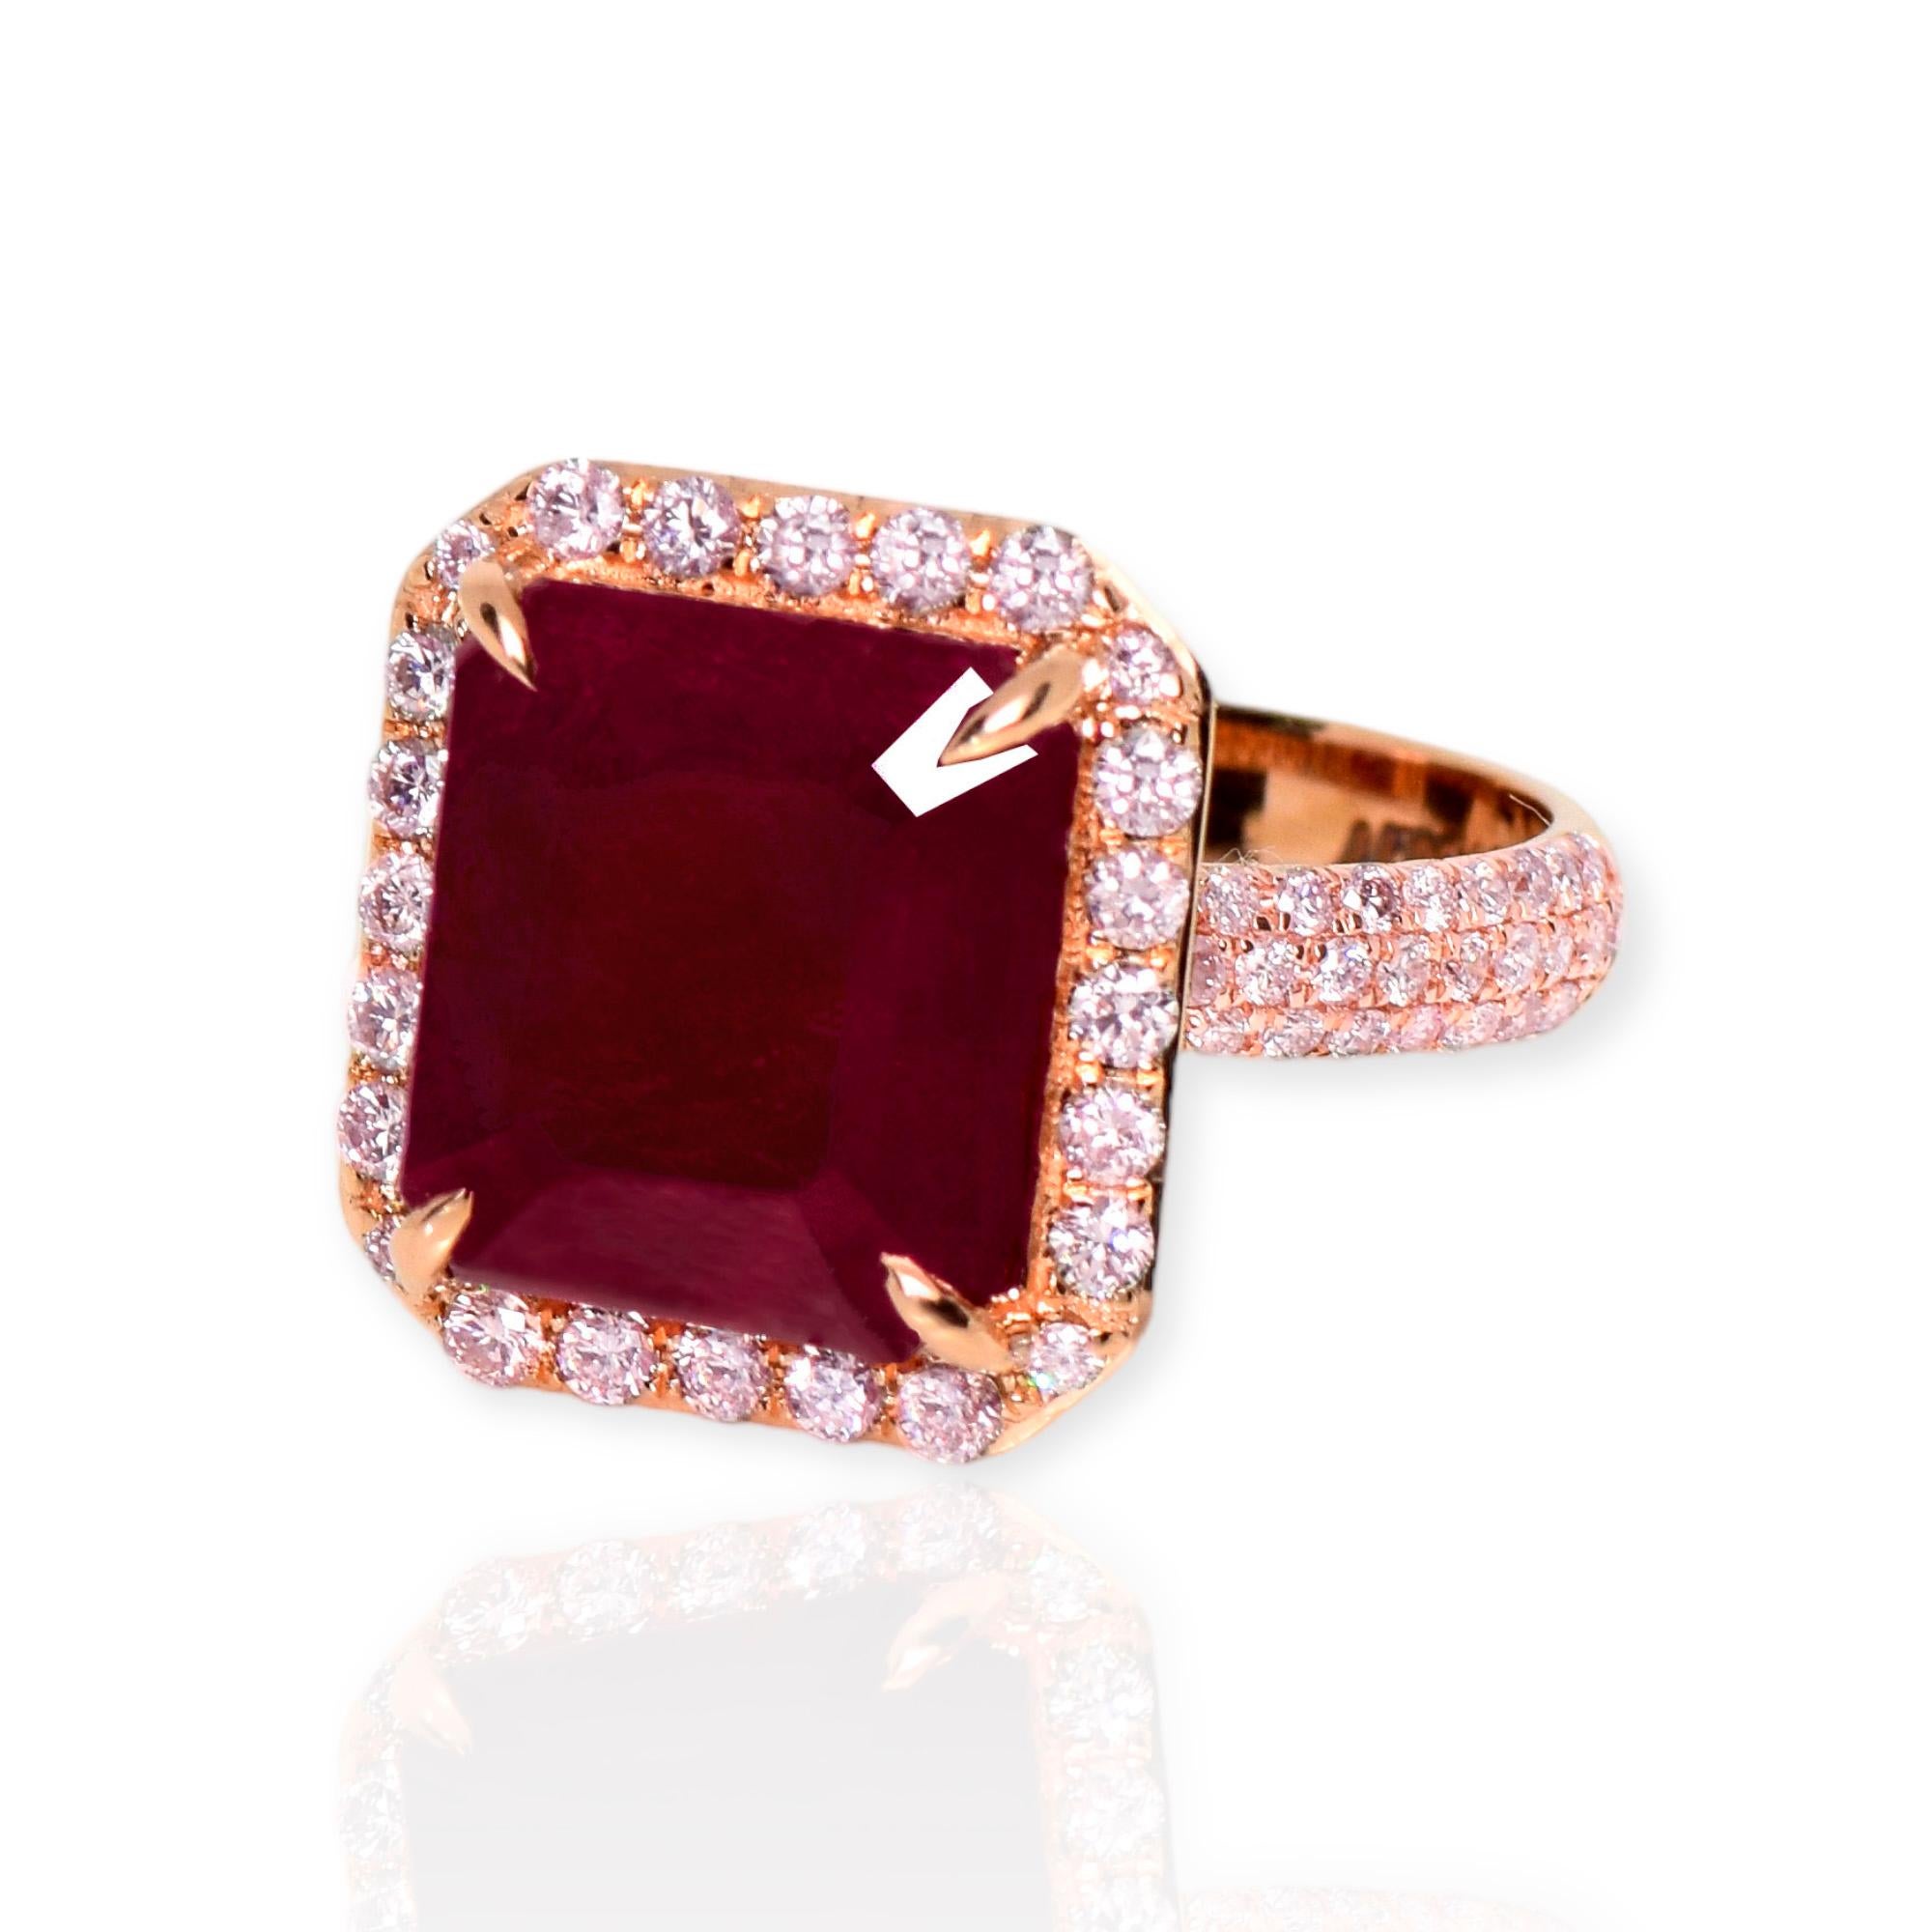 Emerald Cut IGI 14K 6.70 ct Natural Unheated Red Ruby&Pink Diamonds Engagement Ring